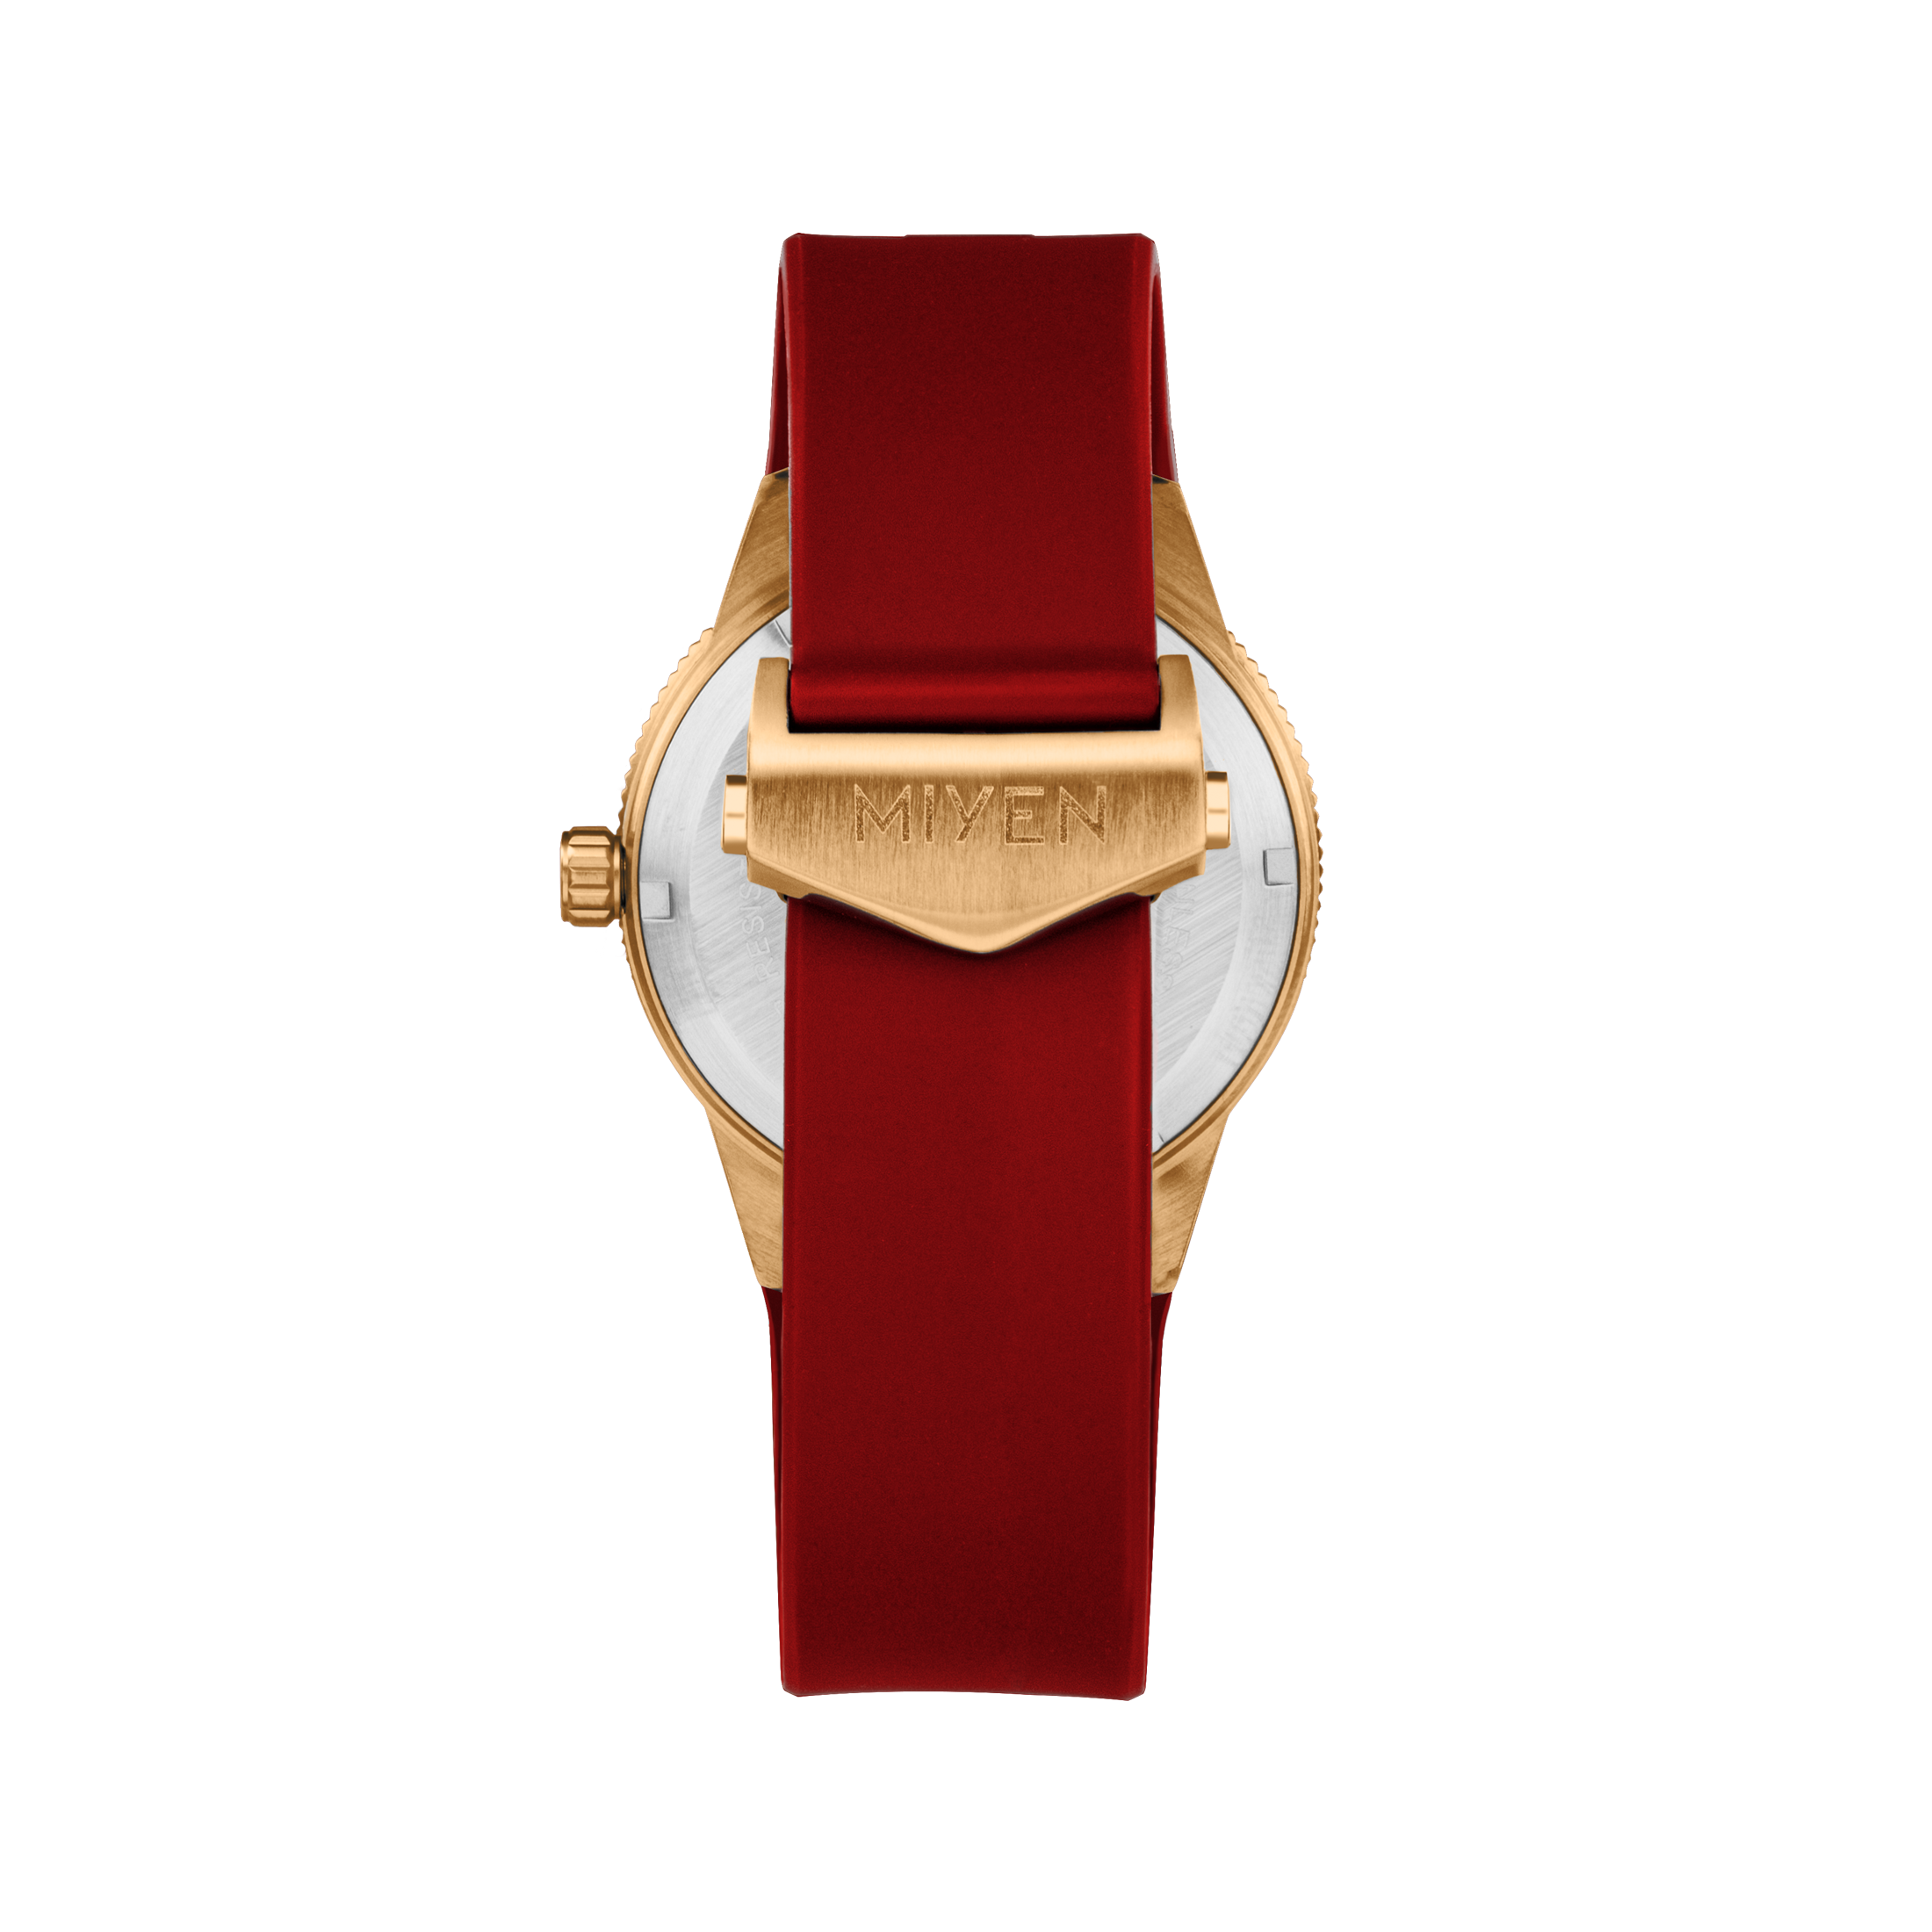 SEA TRAVELLER - Red rubber strap with golden clasp